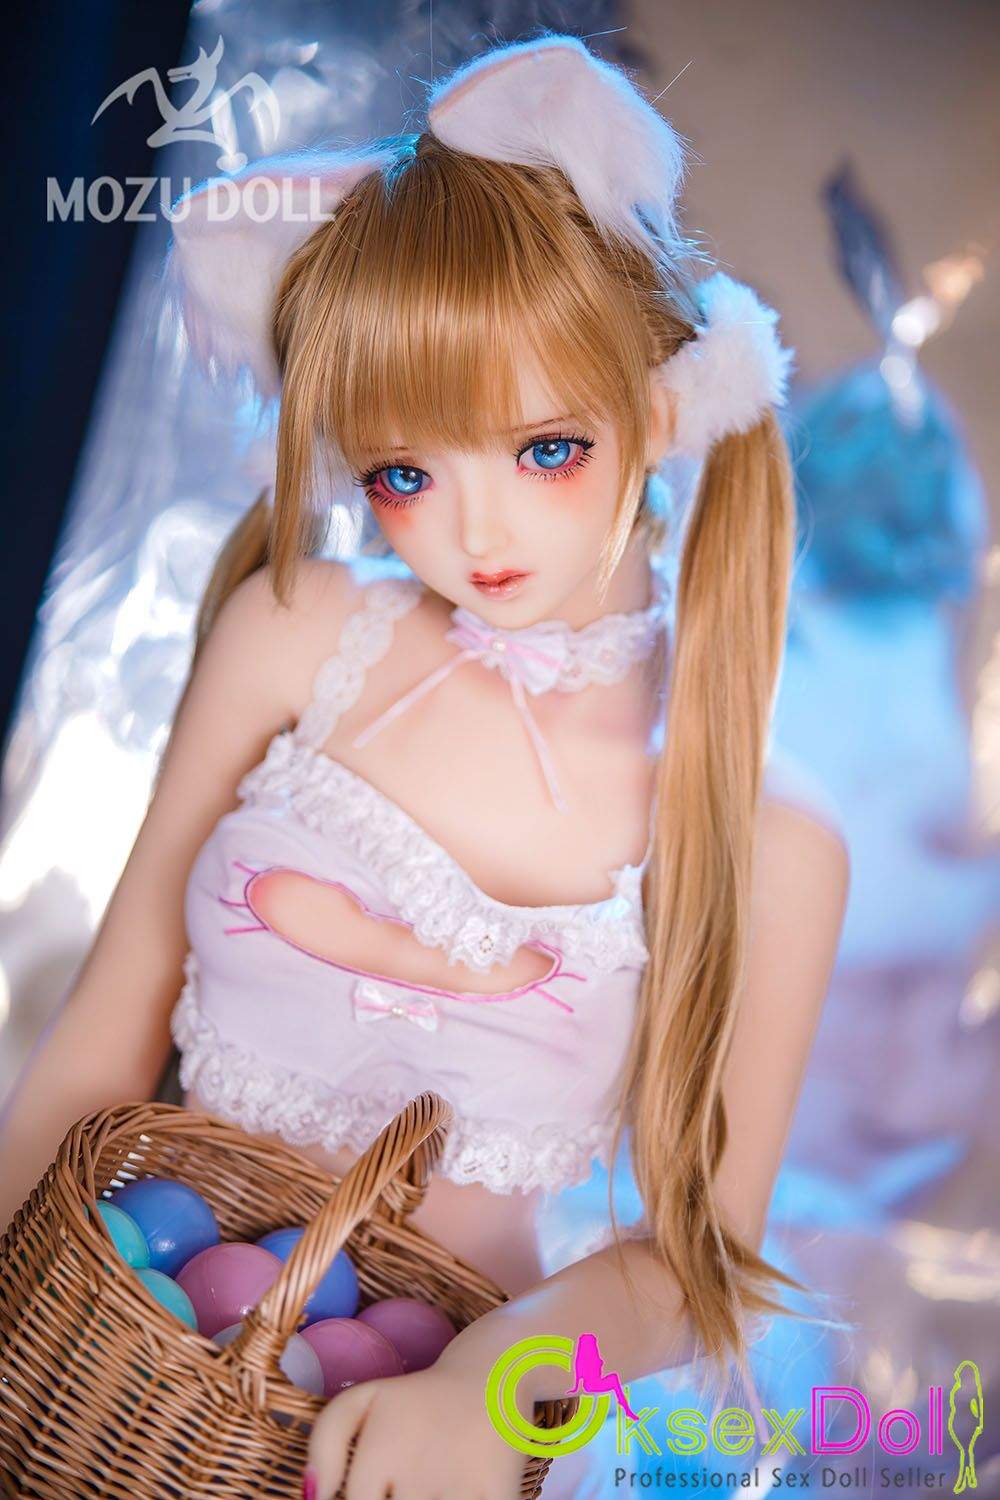 Small Boobs Real Doll images